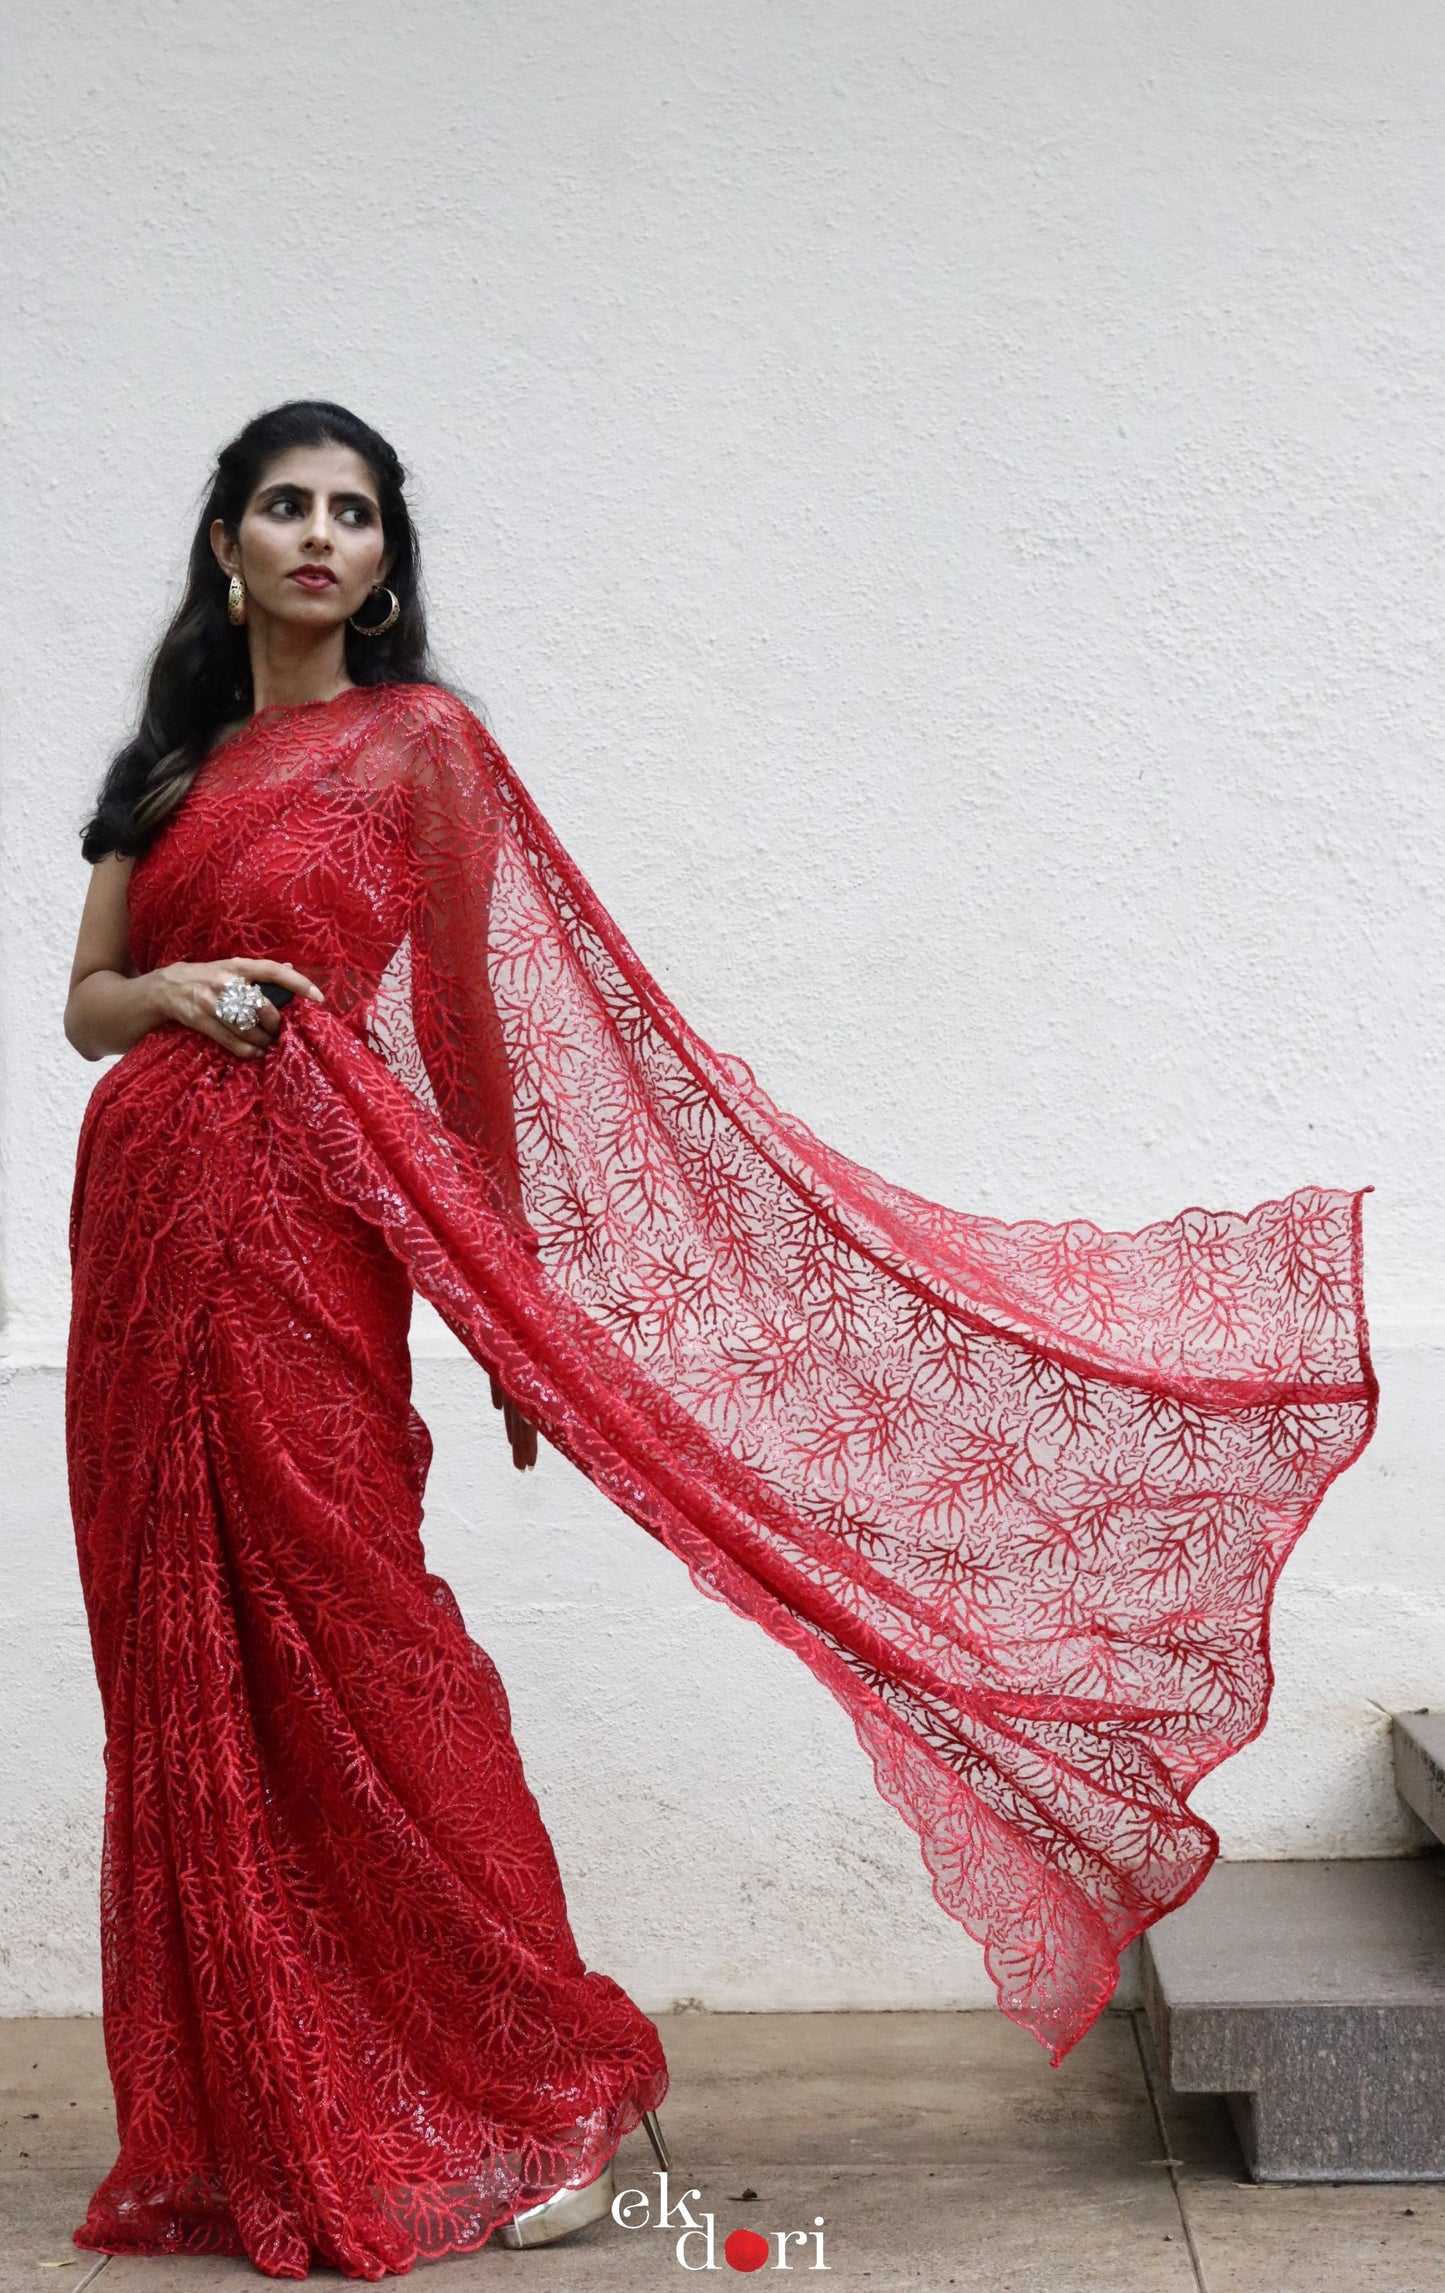 Statement Cocktail Net And Lace Red Saree : Lady In Red Net Lace Saree